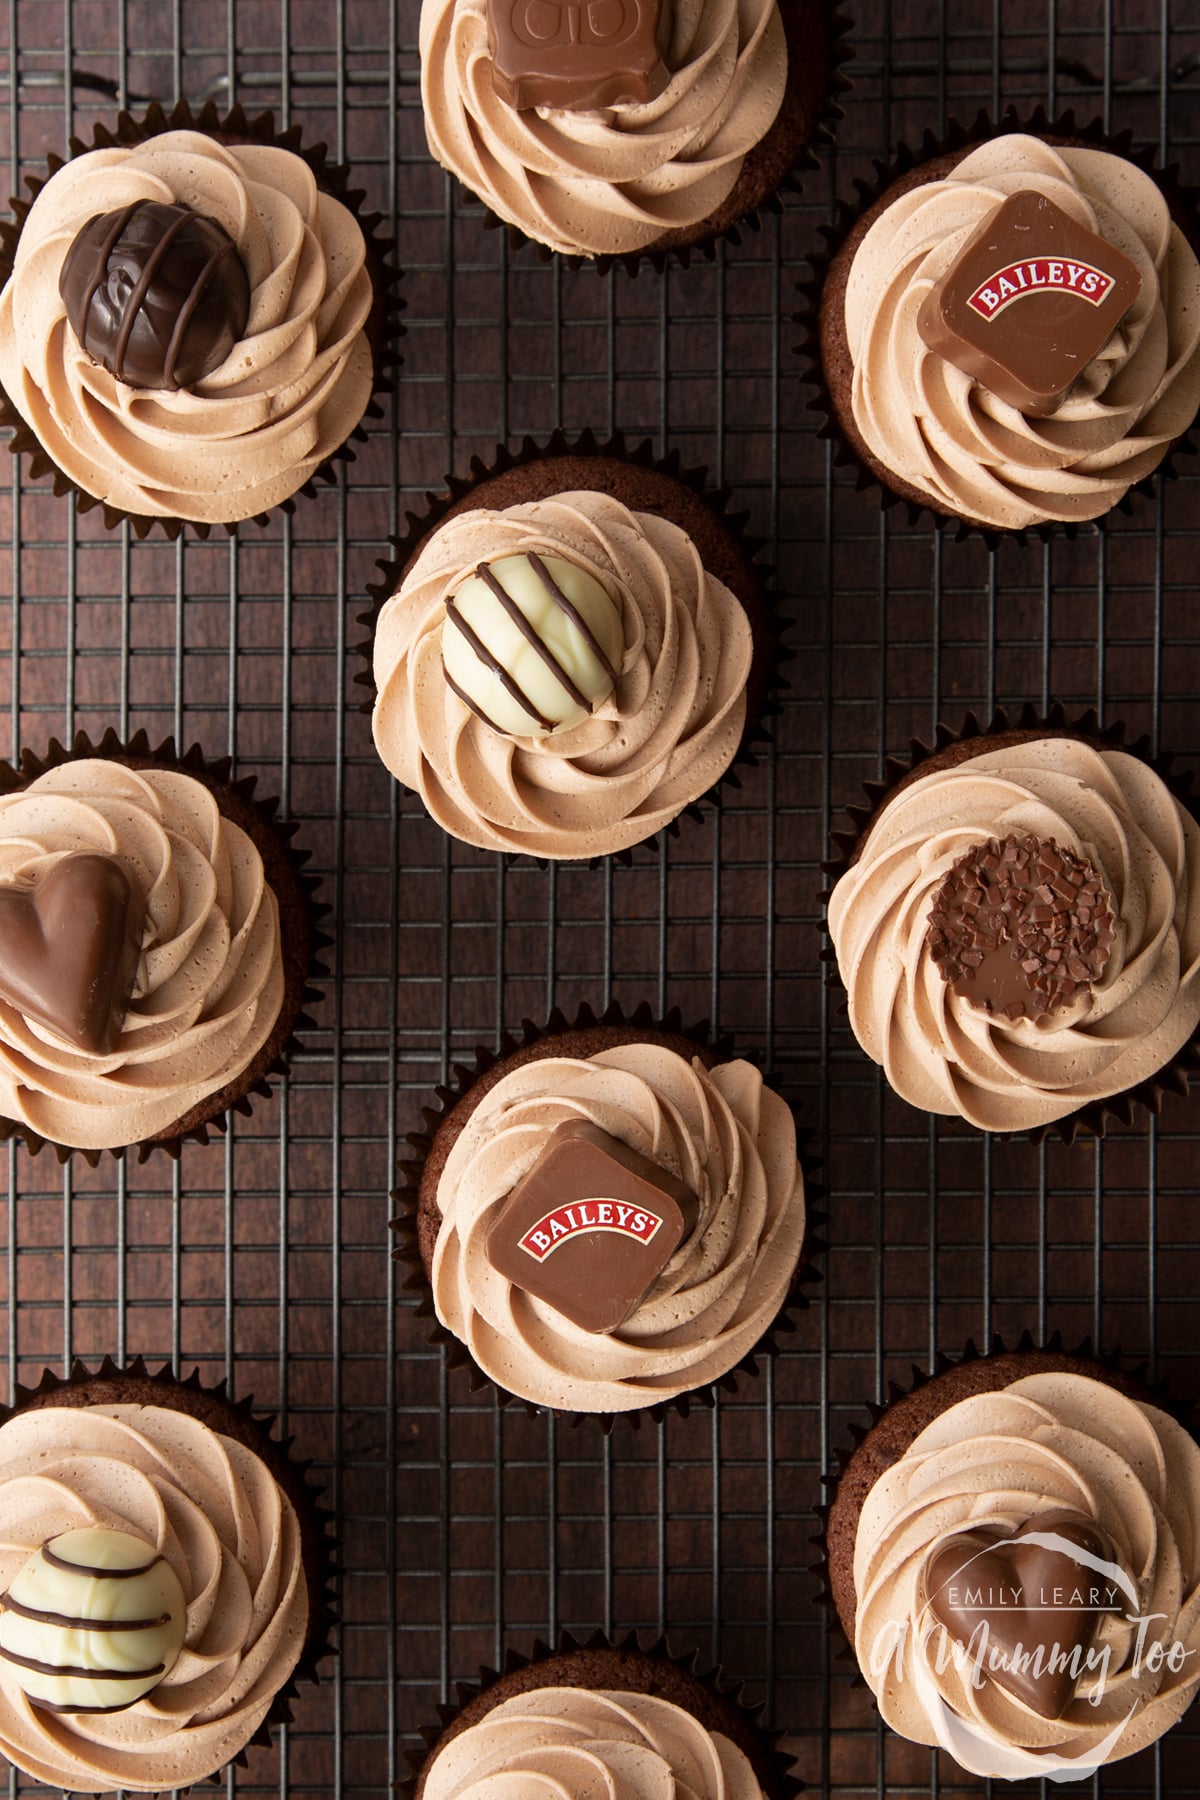 Baileys chocolate cupcakes topped with Baileys icing and a Baileys chocolate. Shown from above on a wire cooling rack.